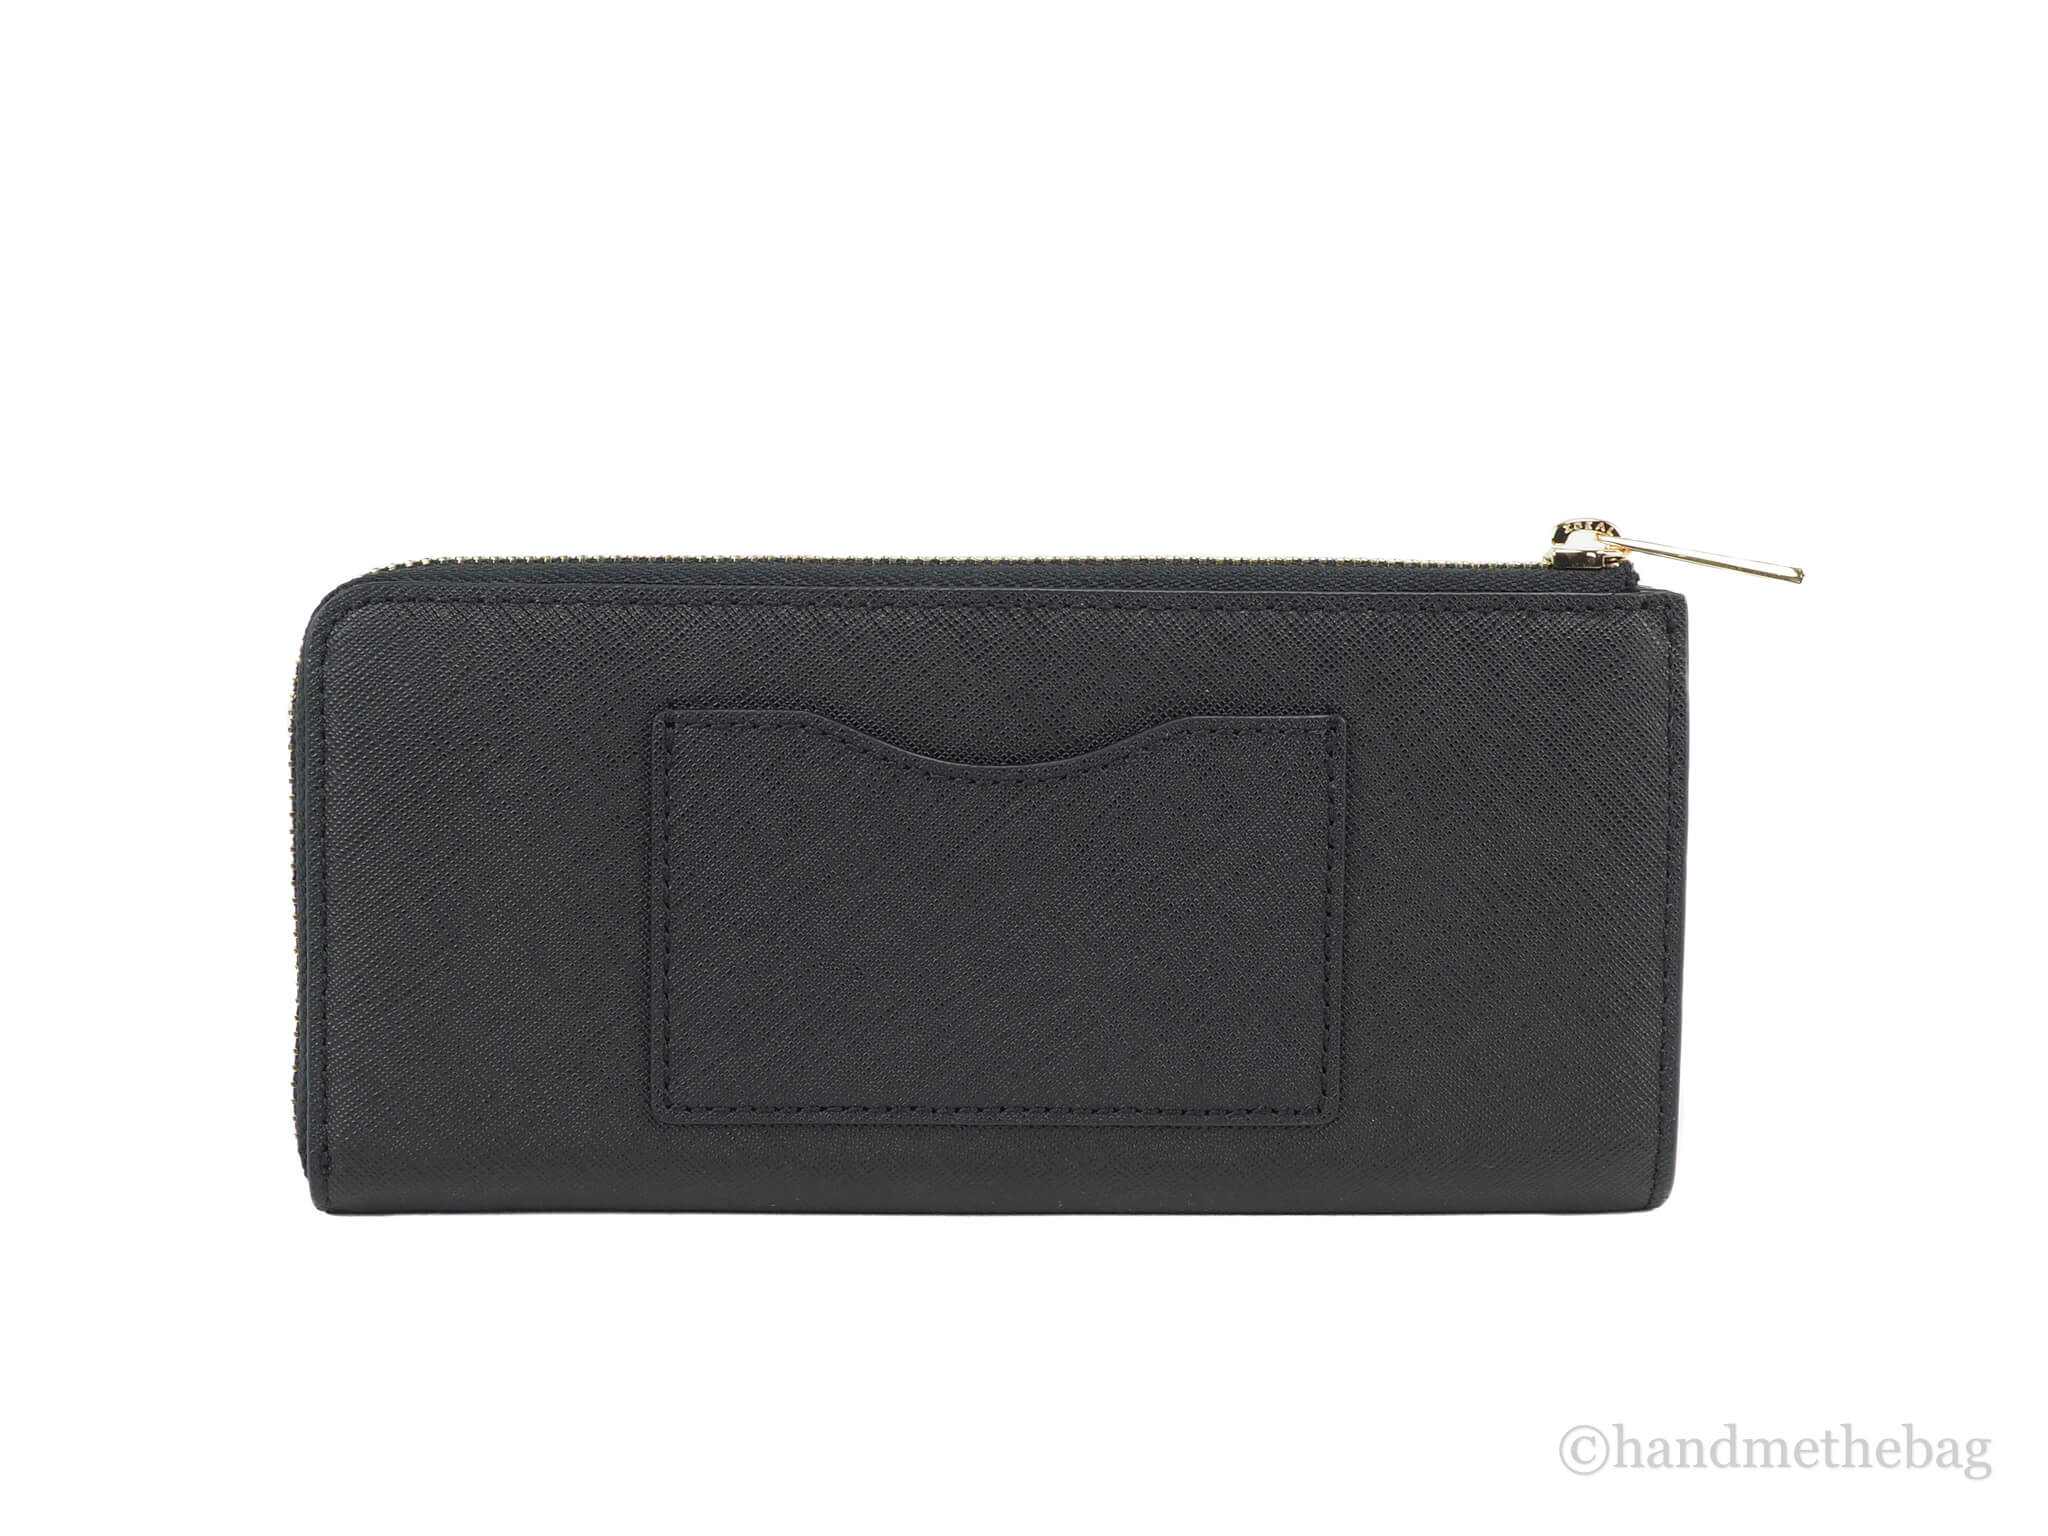 Tory Burch emerson black l-zip wallet back on white background